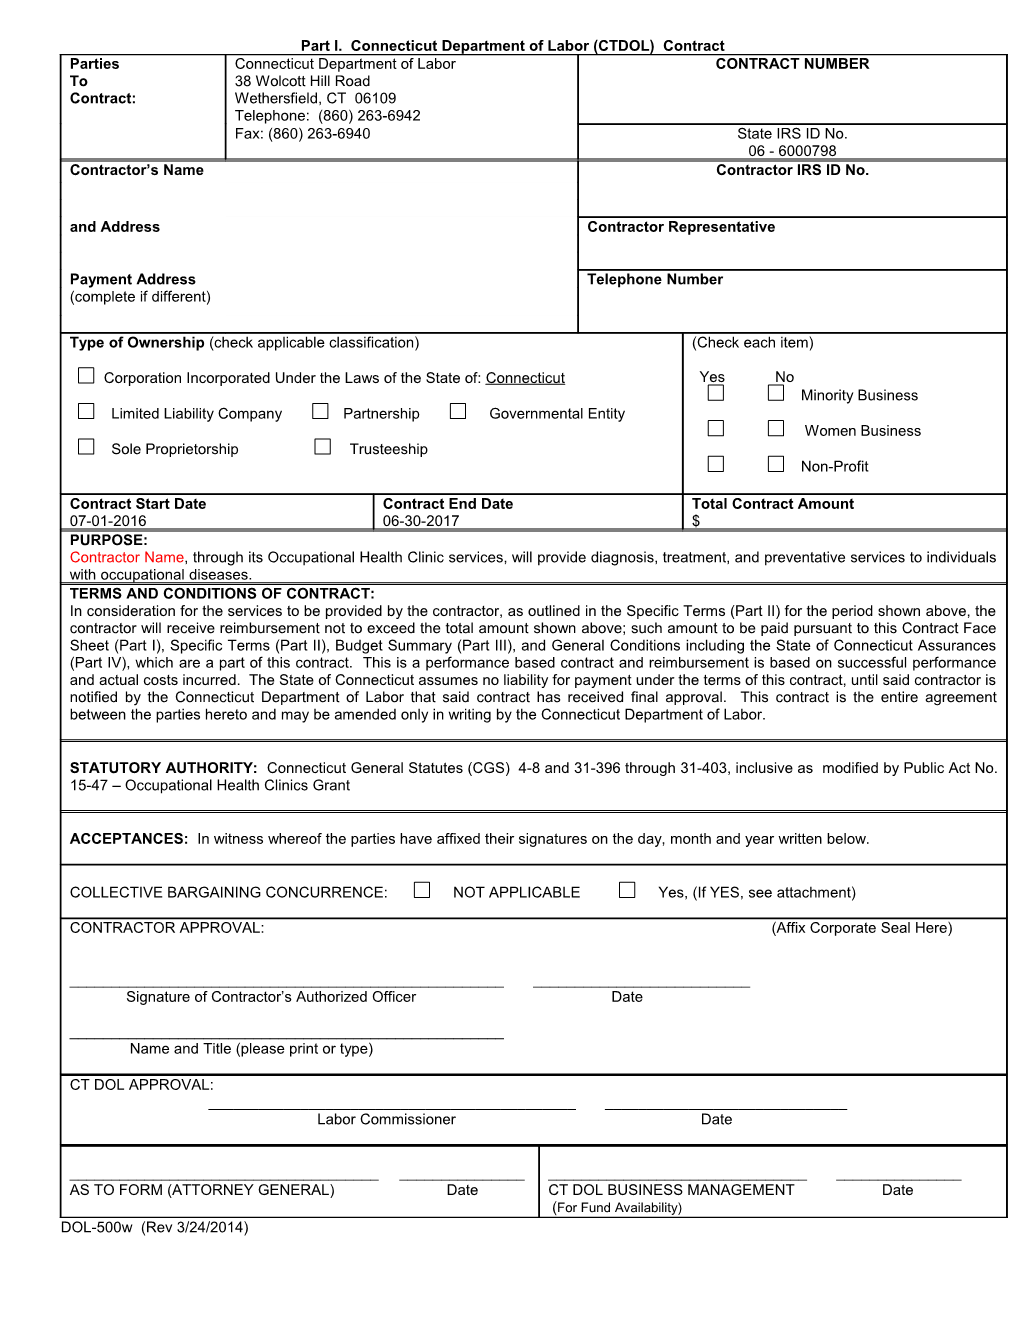 Part I. Connecticut Department of Labor (CTDOL) Contract s1